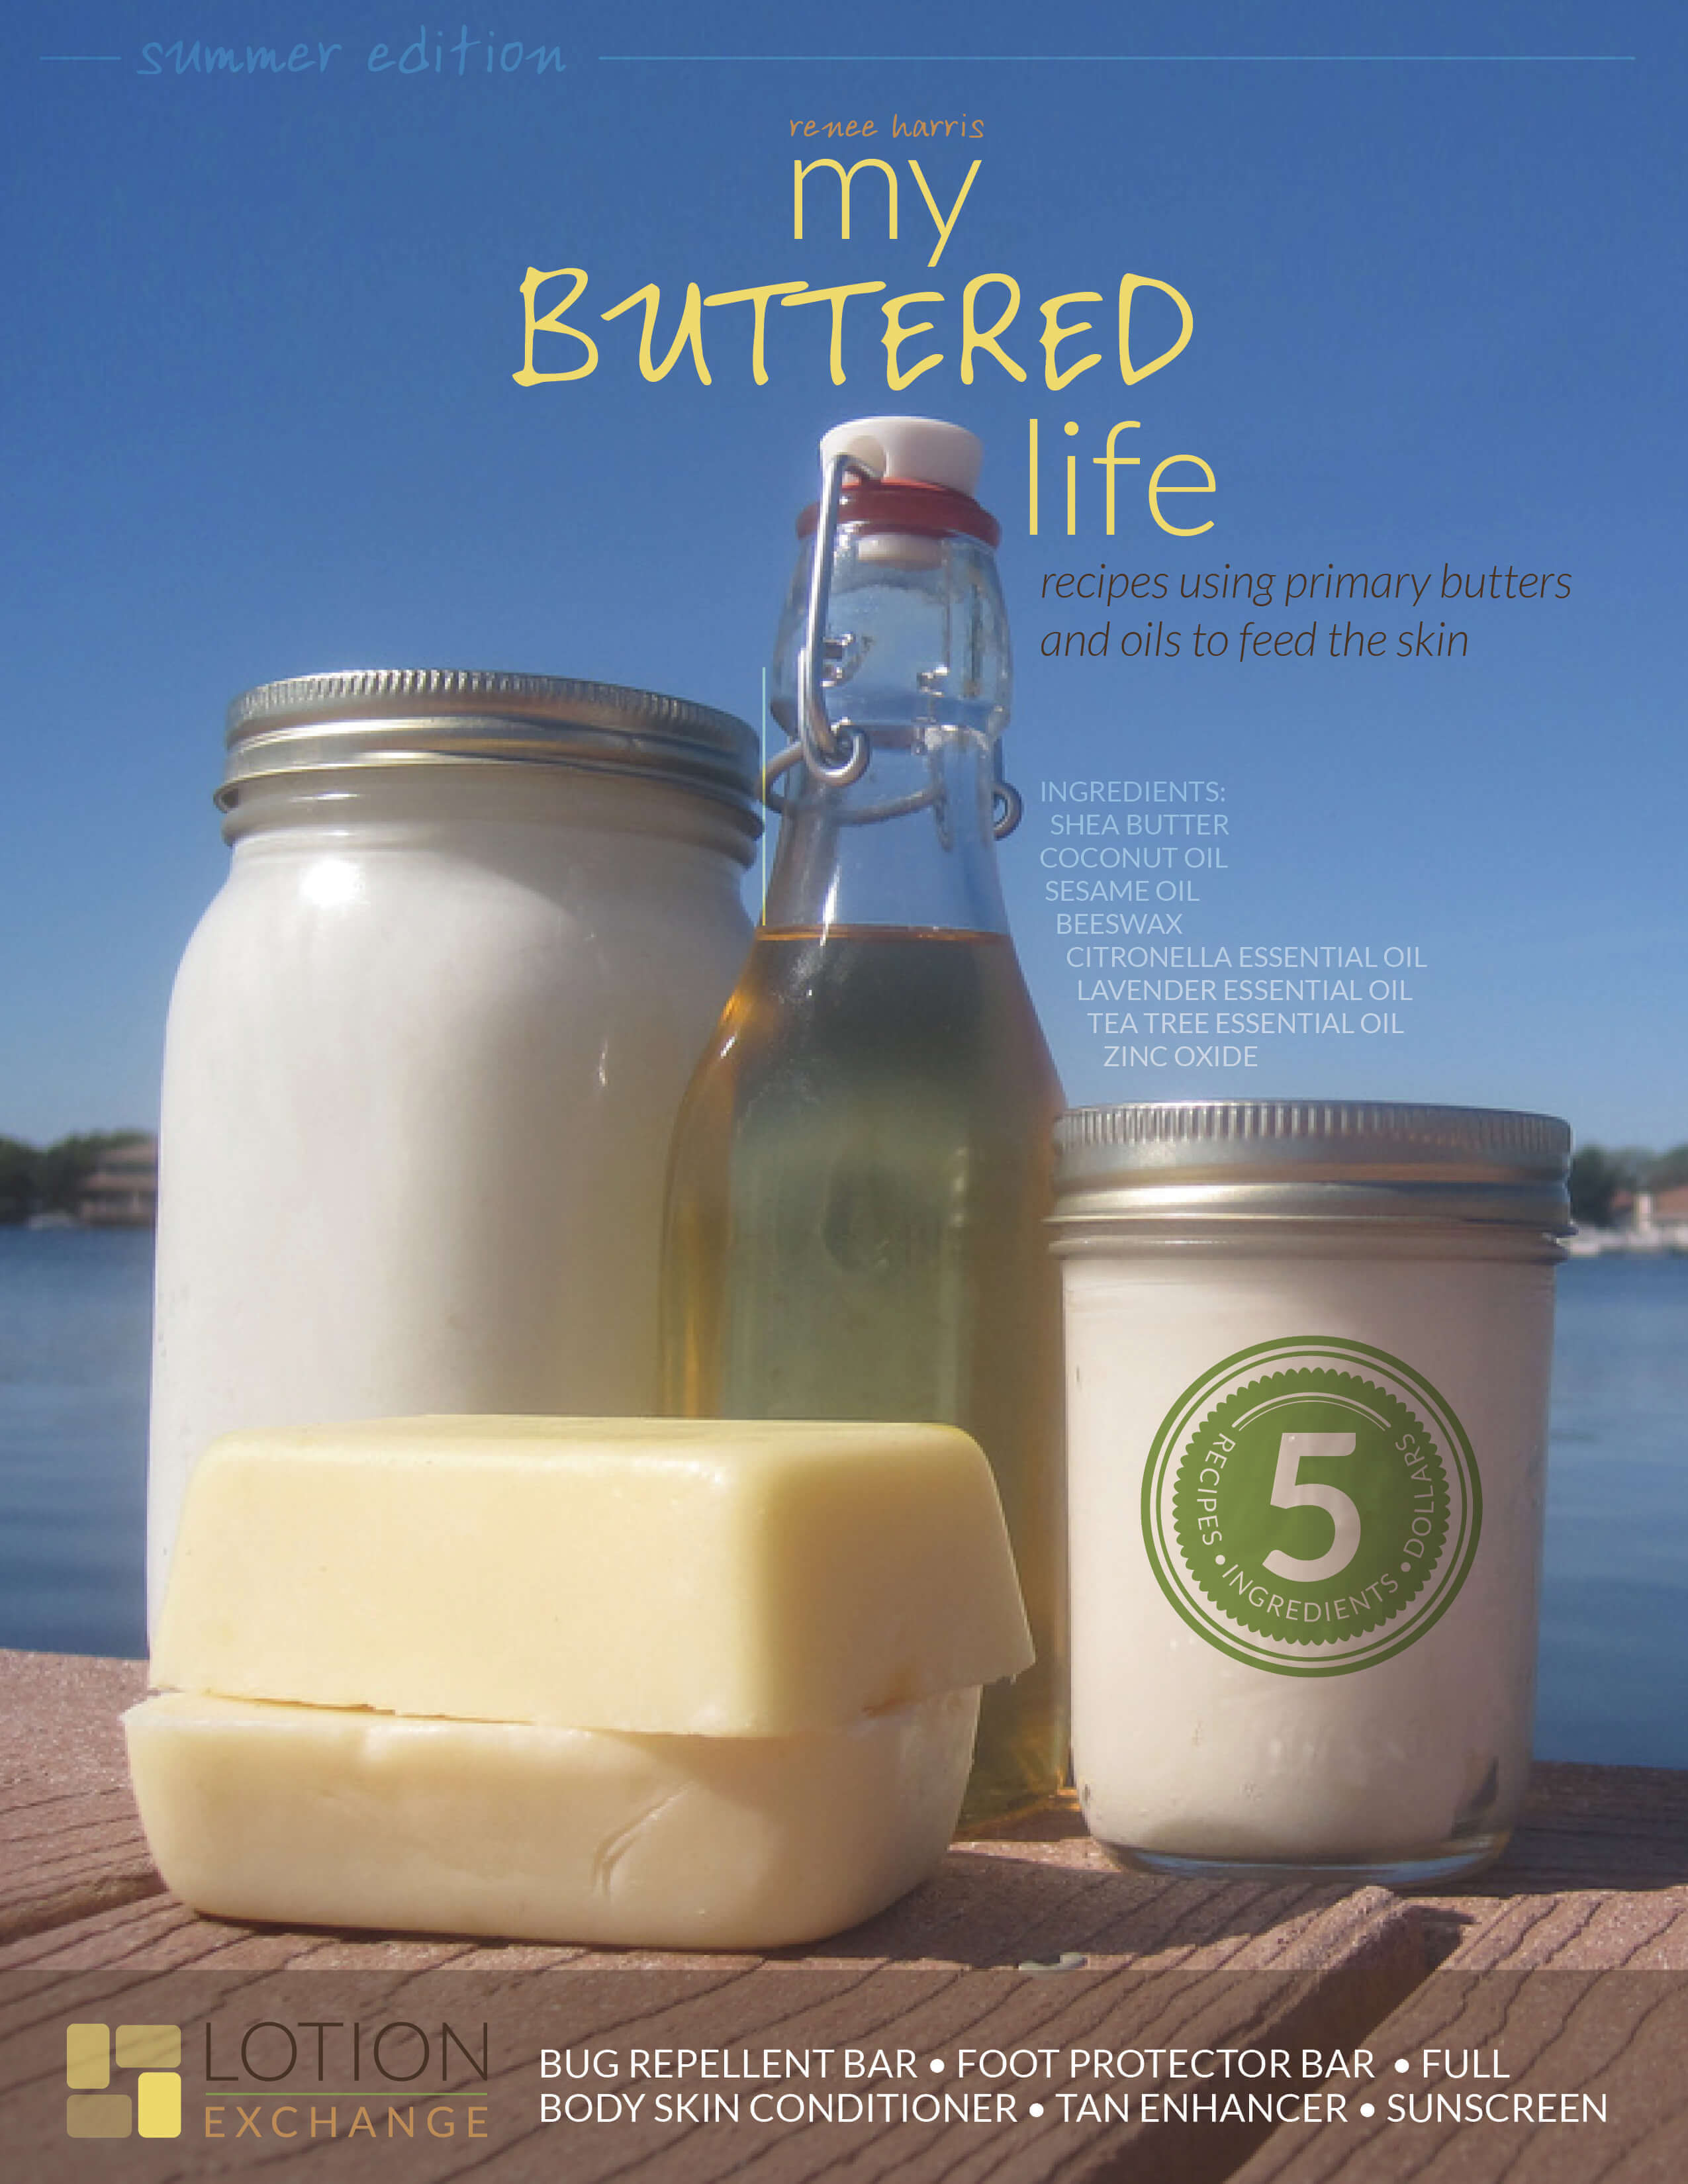 My Buttered Life Ebook: 5 Summer Skin Recipes and a Giveaway!